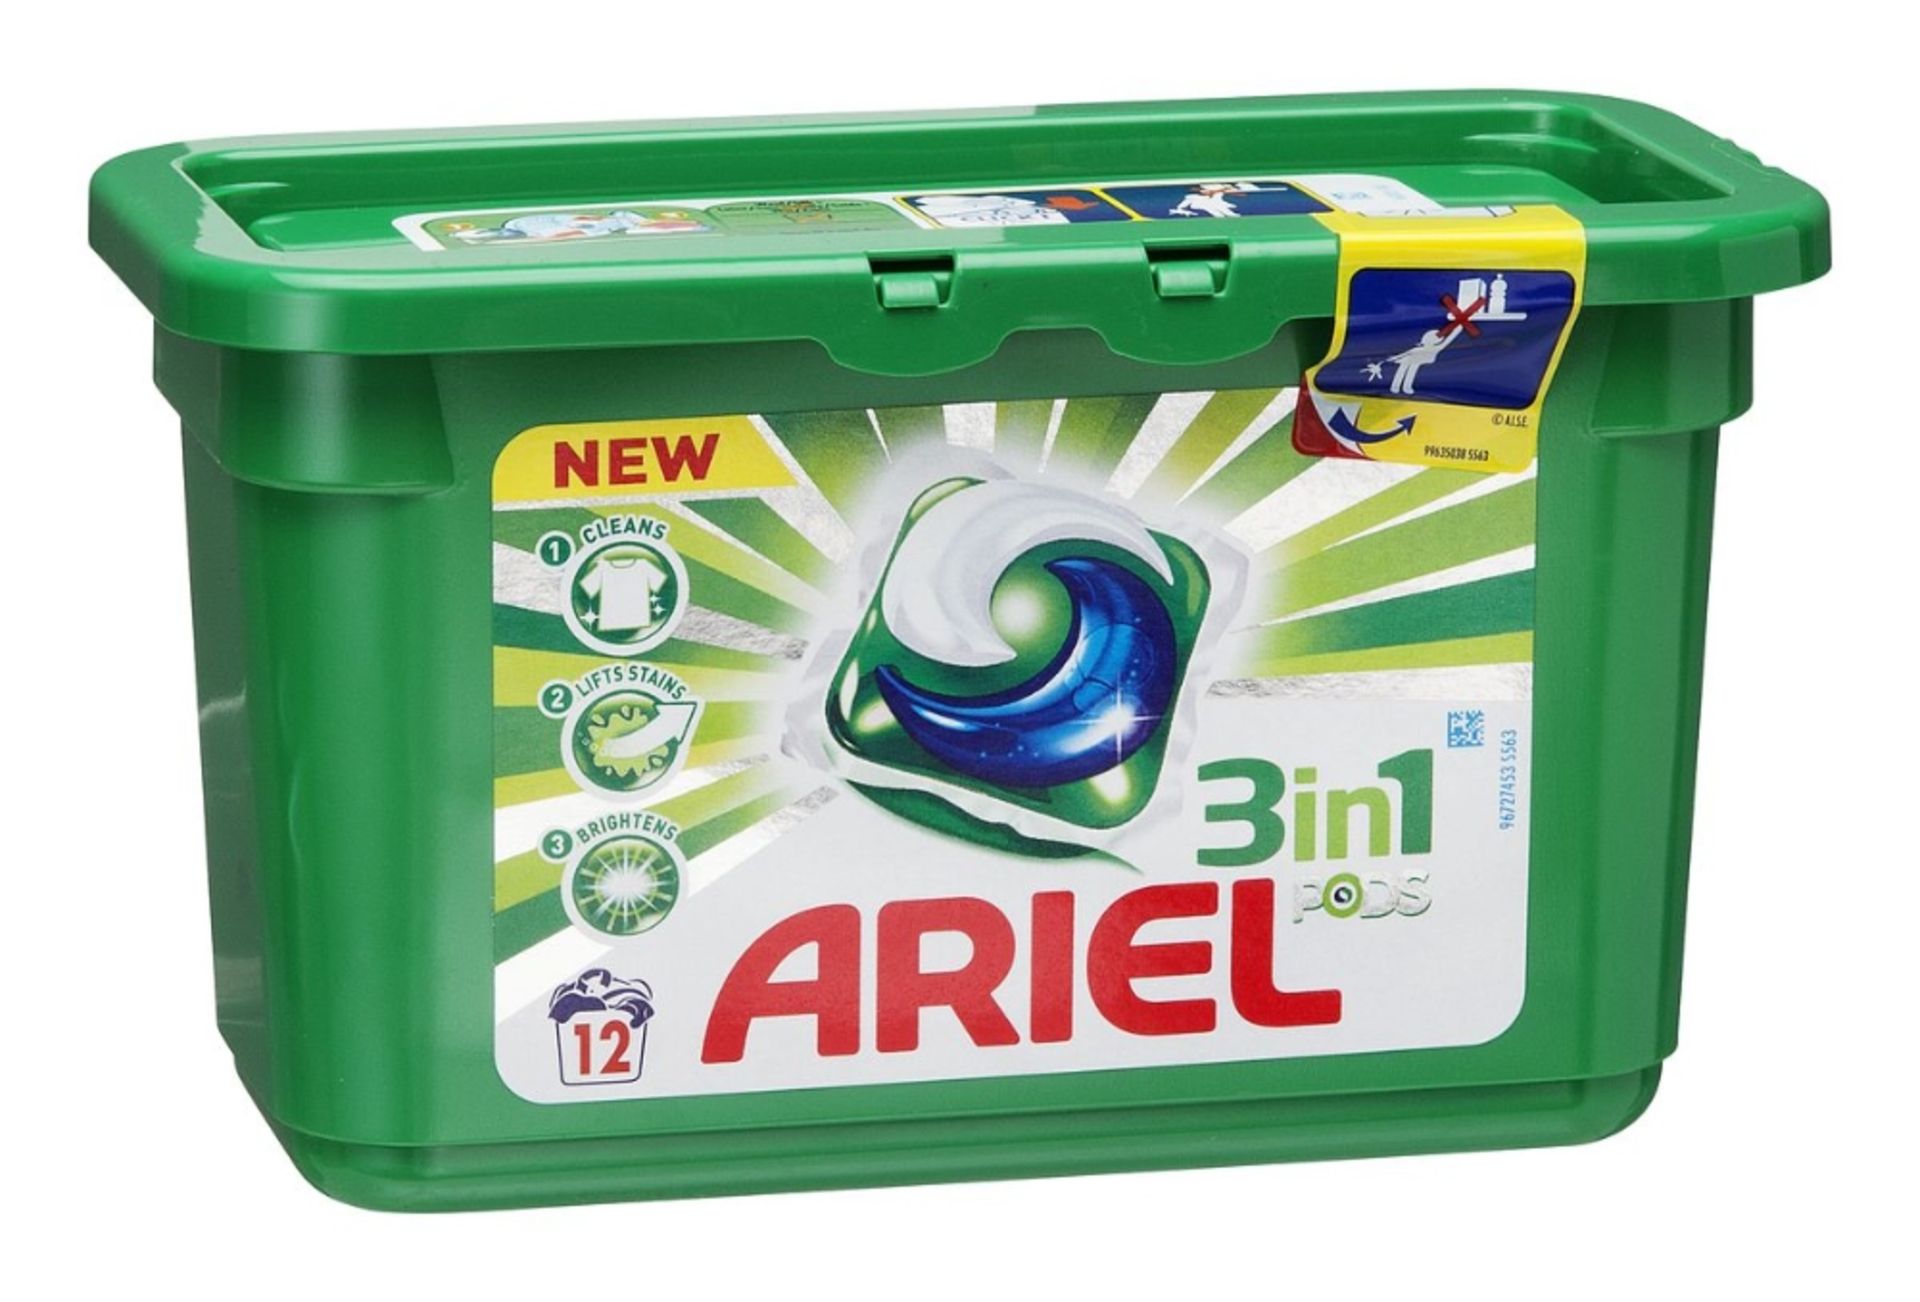 V Brand New Ariel 3 in 1 Pods 12 Wash Pack RRP8.99 X 60  Bid price to be multiplied by Sixty